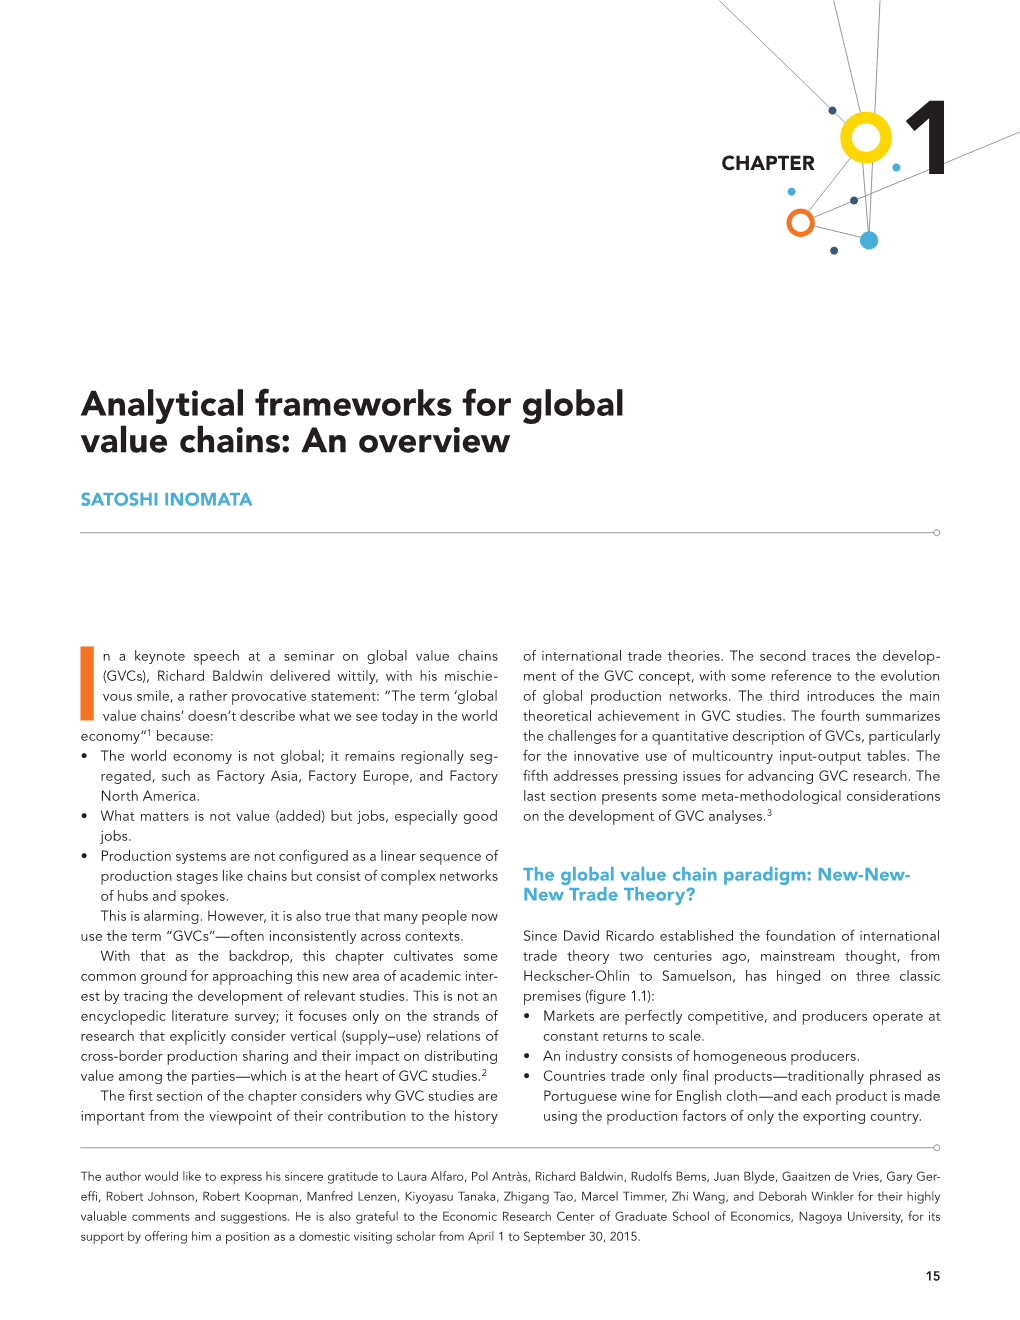 Analytical Frameworks for Global Value Chains: an Overview